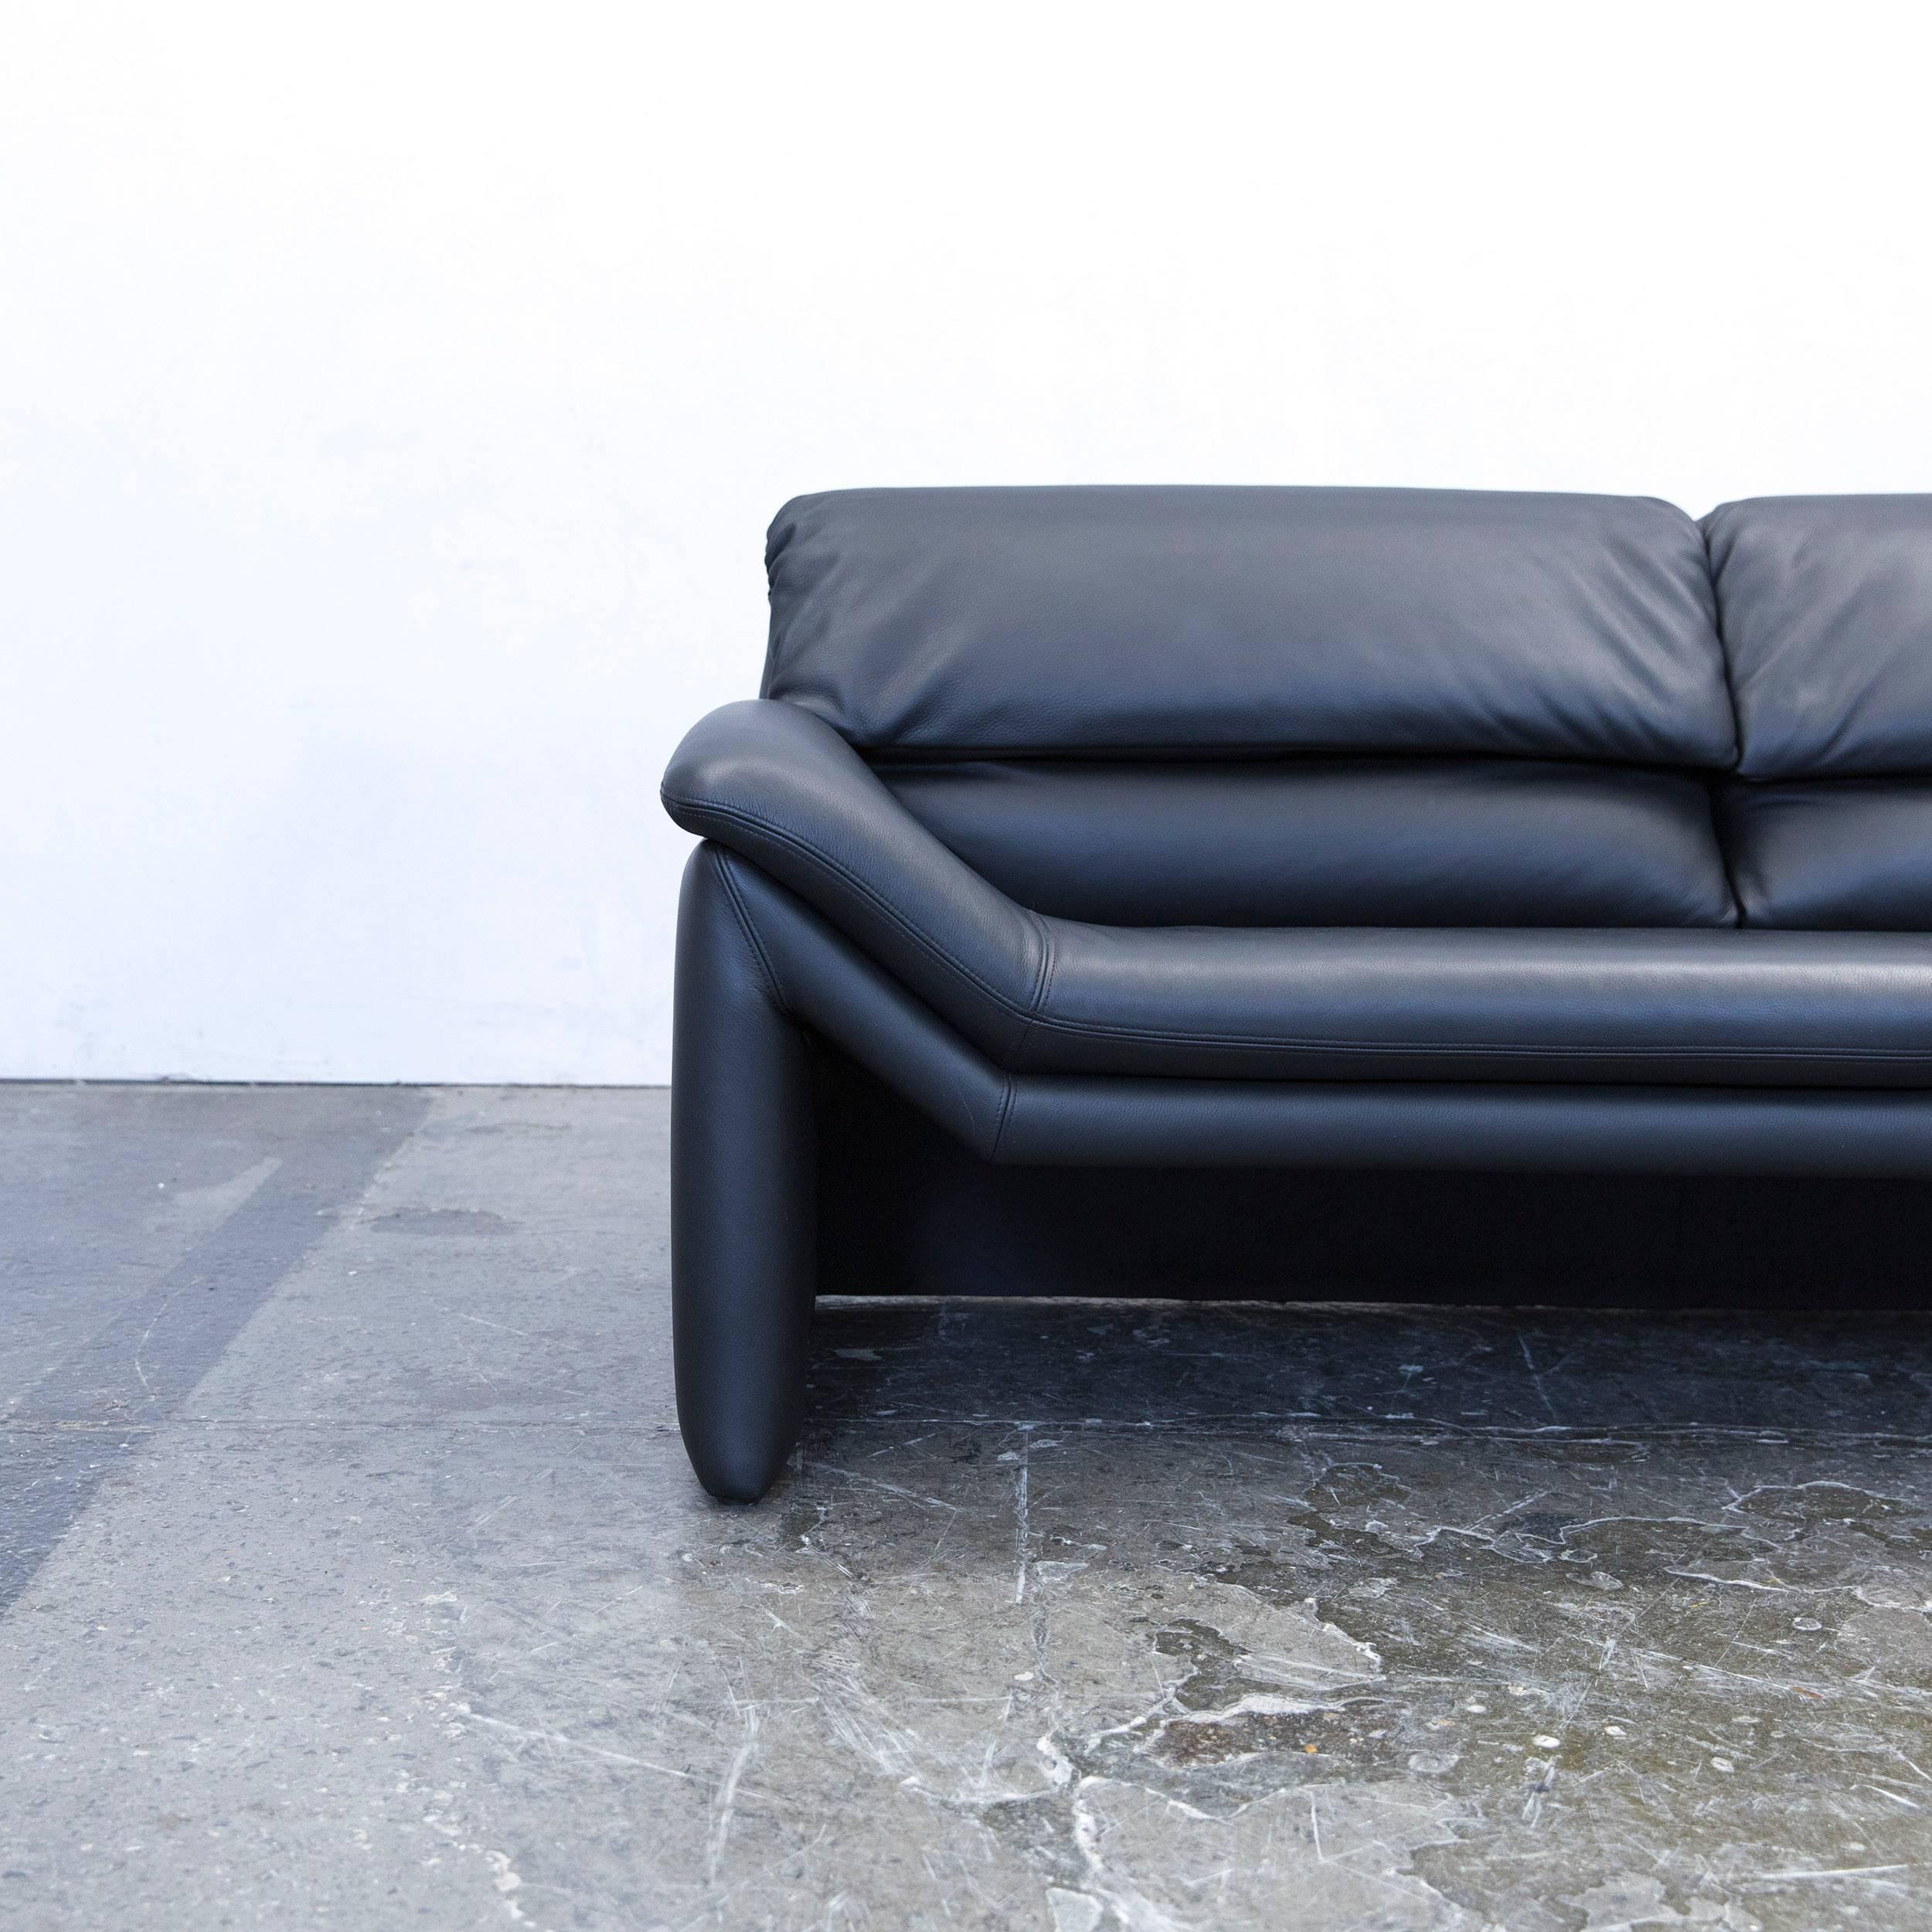 Black colored original De Sede designer leather sofa in a minimalistic and modern design, with convenient functions, made for pure comfort and flexibility.